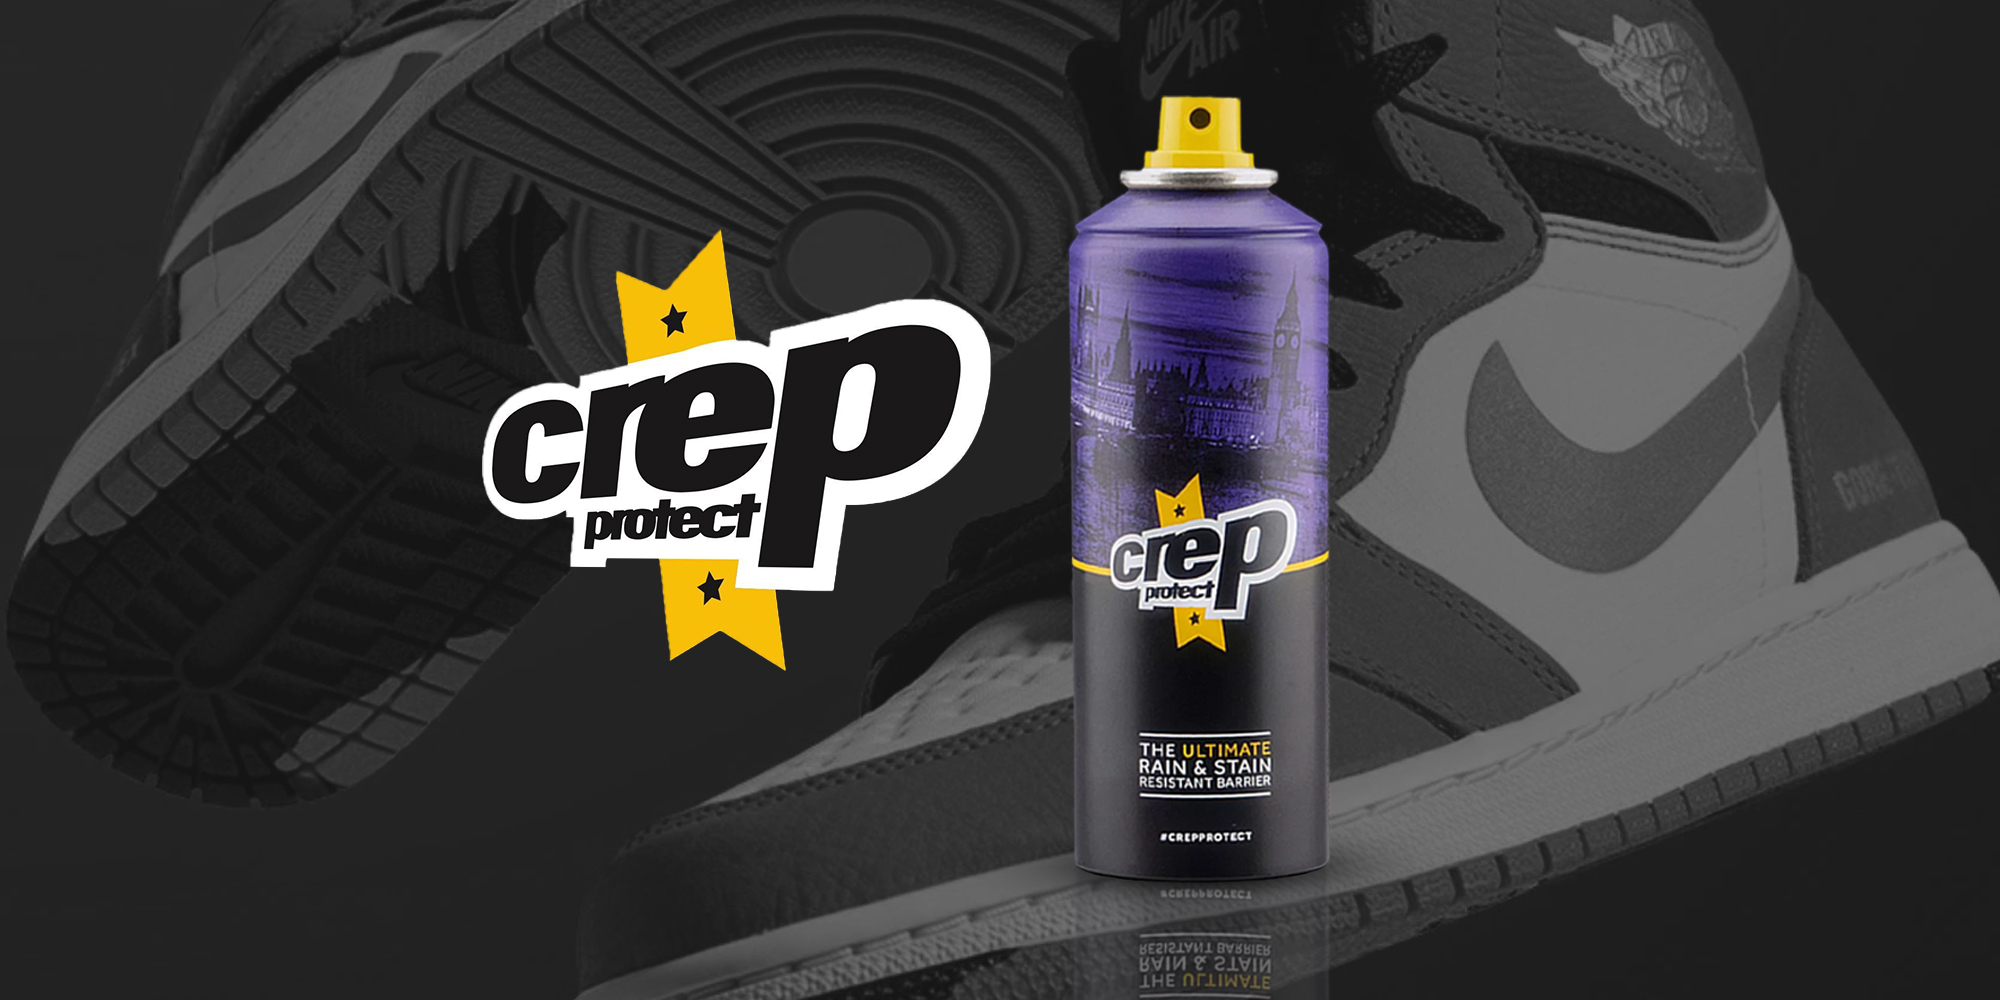 Crep Protect The Ultimate Rain Stain Resistant Barrier